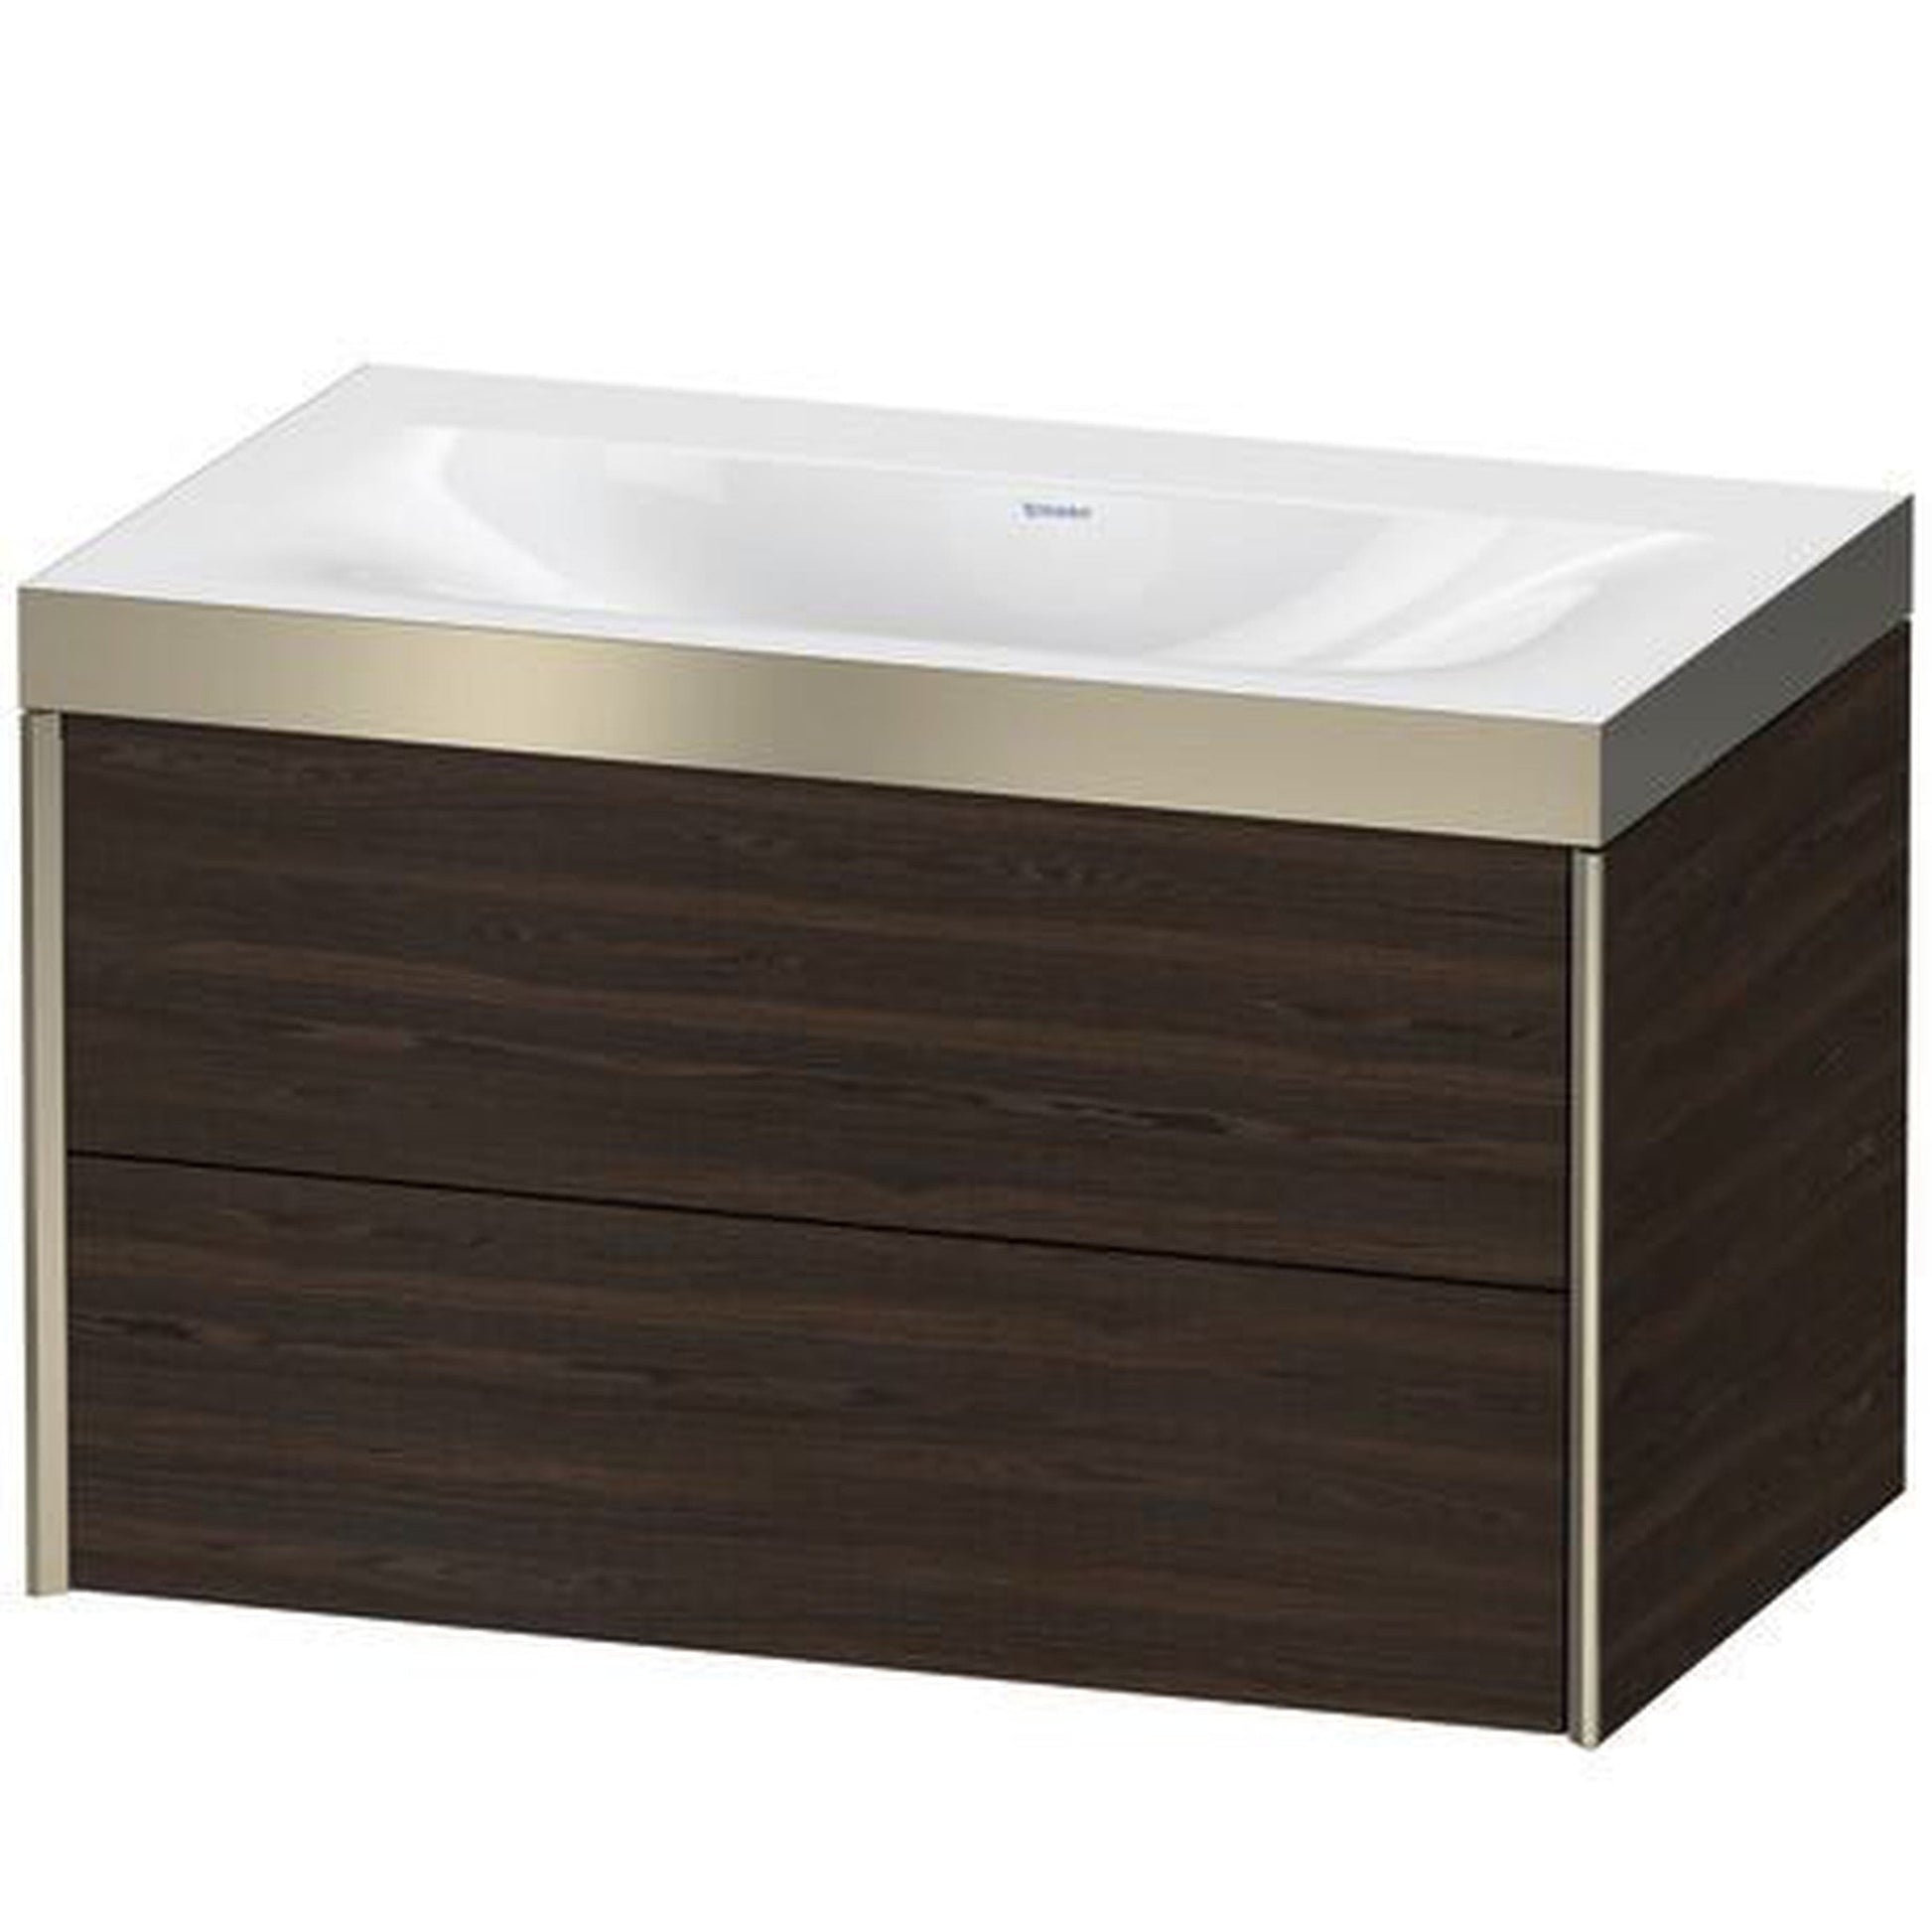 Duravit Xviu 31" x 20" x 19" Two Drawer C-Bonded Wall-Mount Vanity Kit Without Tap Hole, Walnut Brushed (XV4615NB169P)